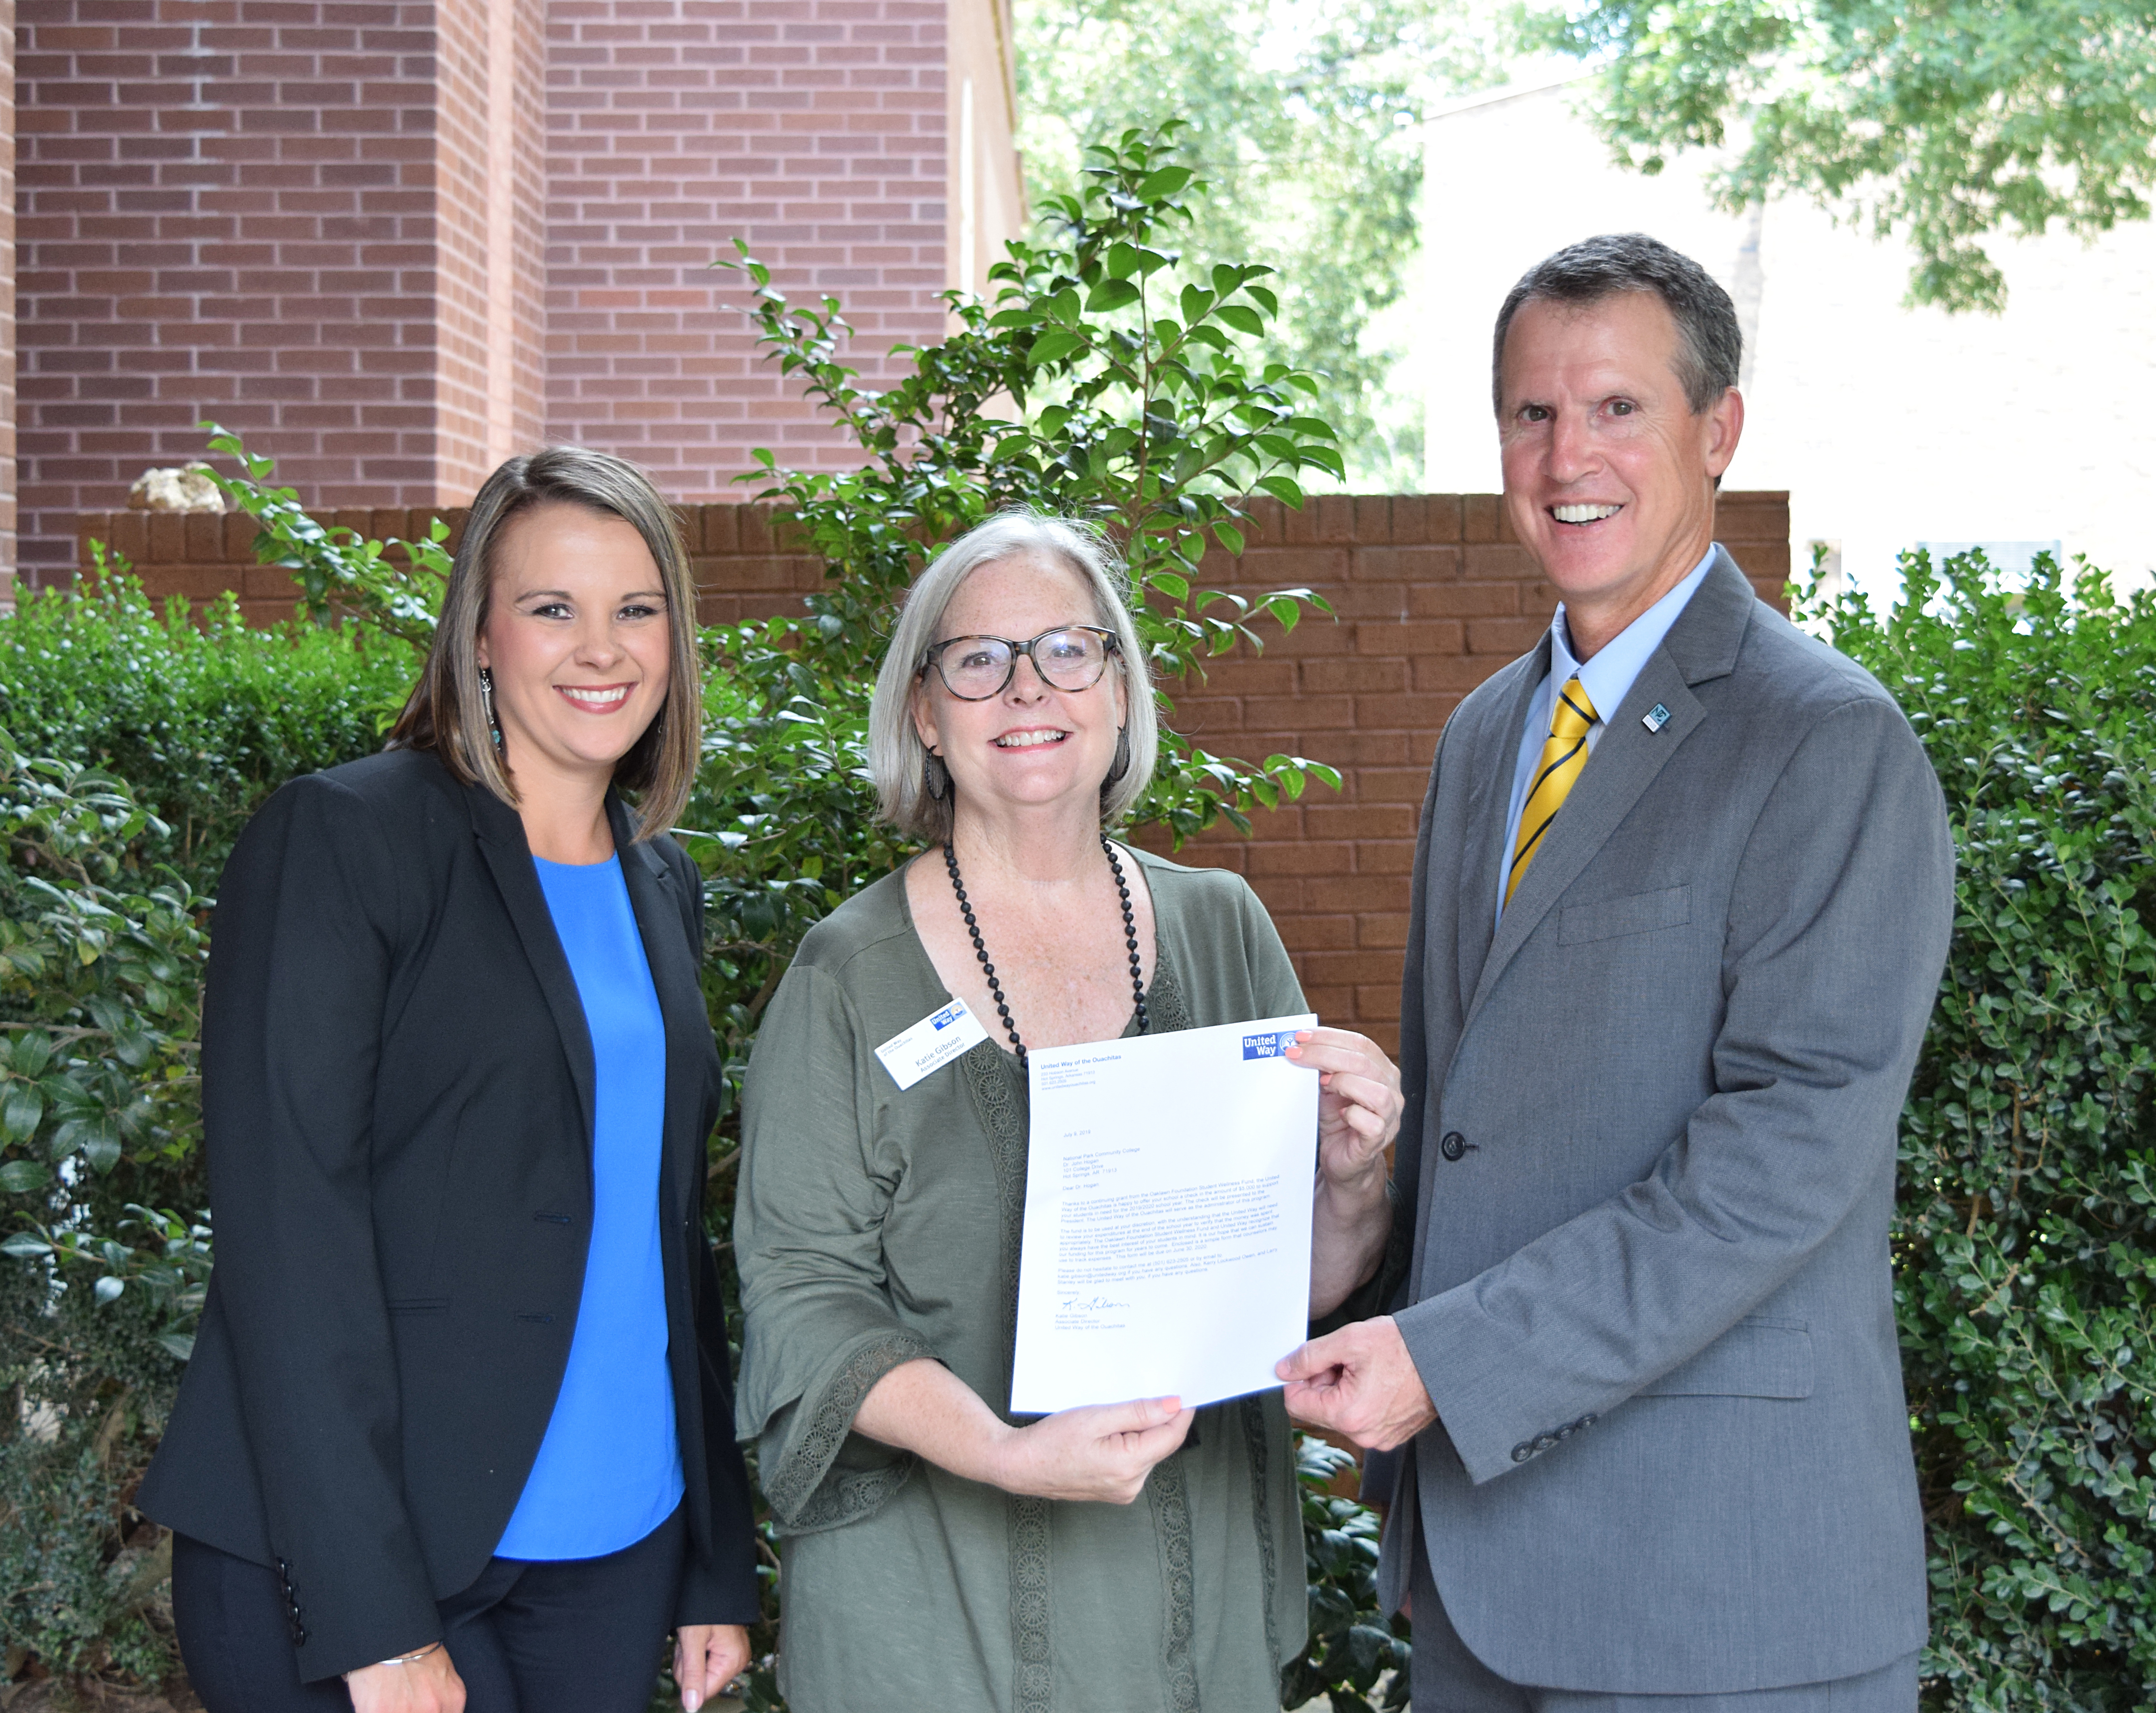 Nicole Herndon, Foundation Director, Dr. John Hogan, President of National Park College, receiving grant from Katie Gibson, Associate Director of the United Way of the Ouachitas.